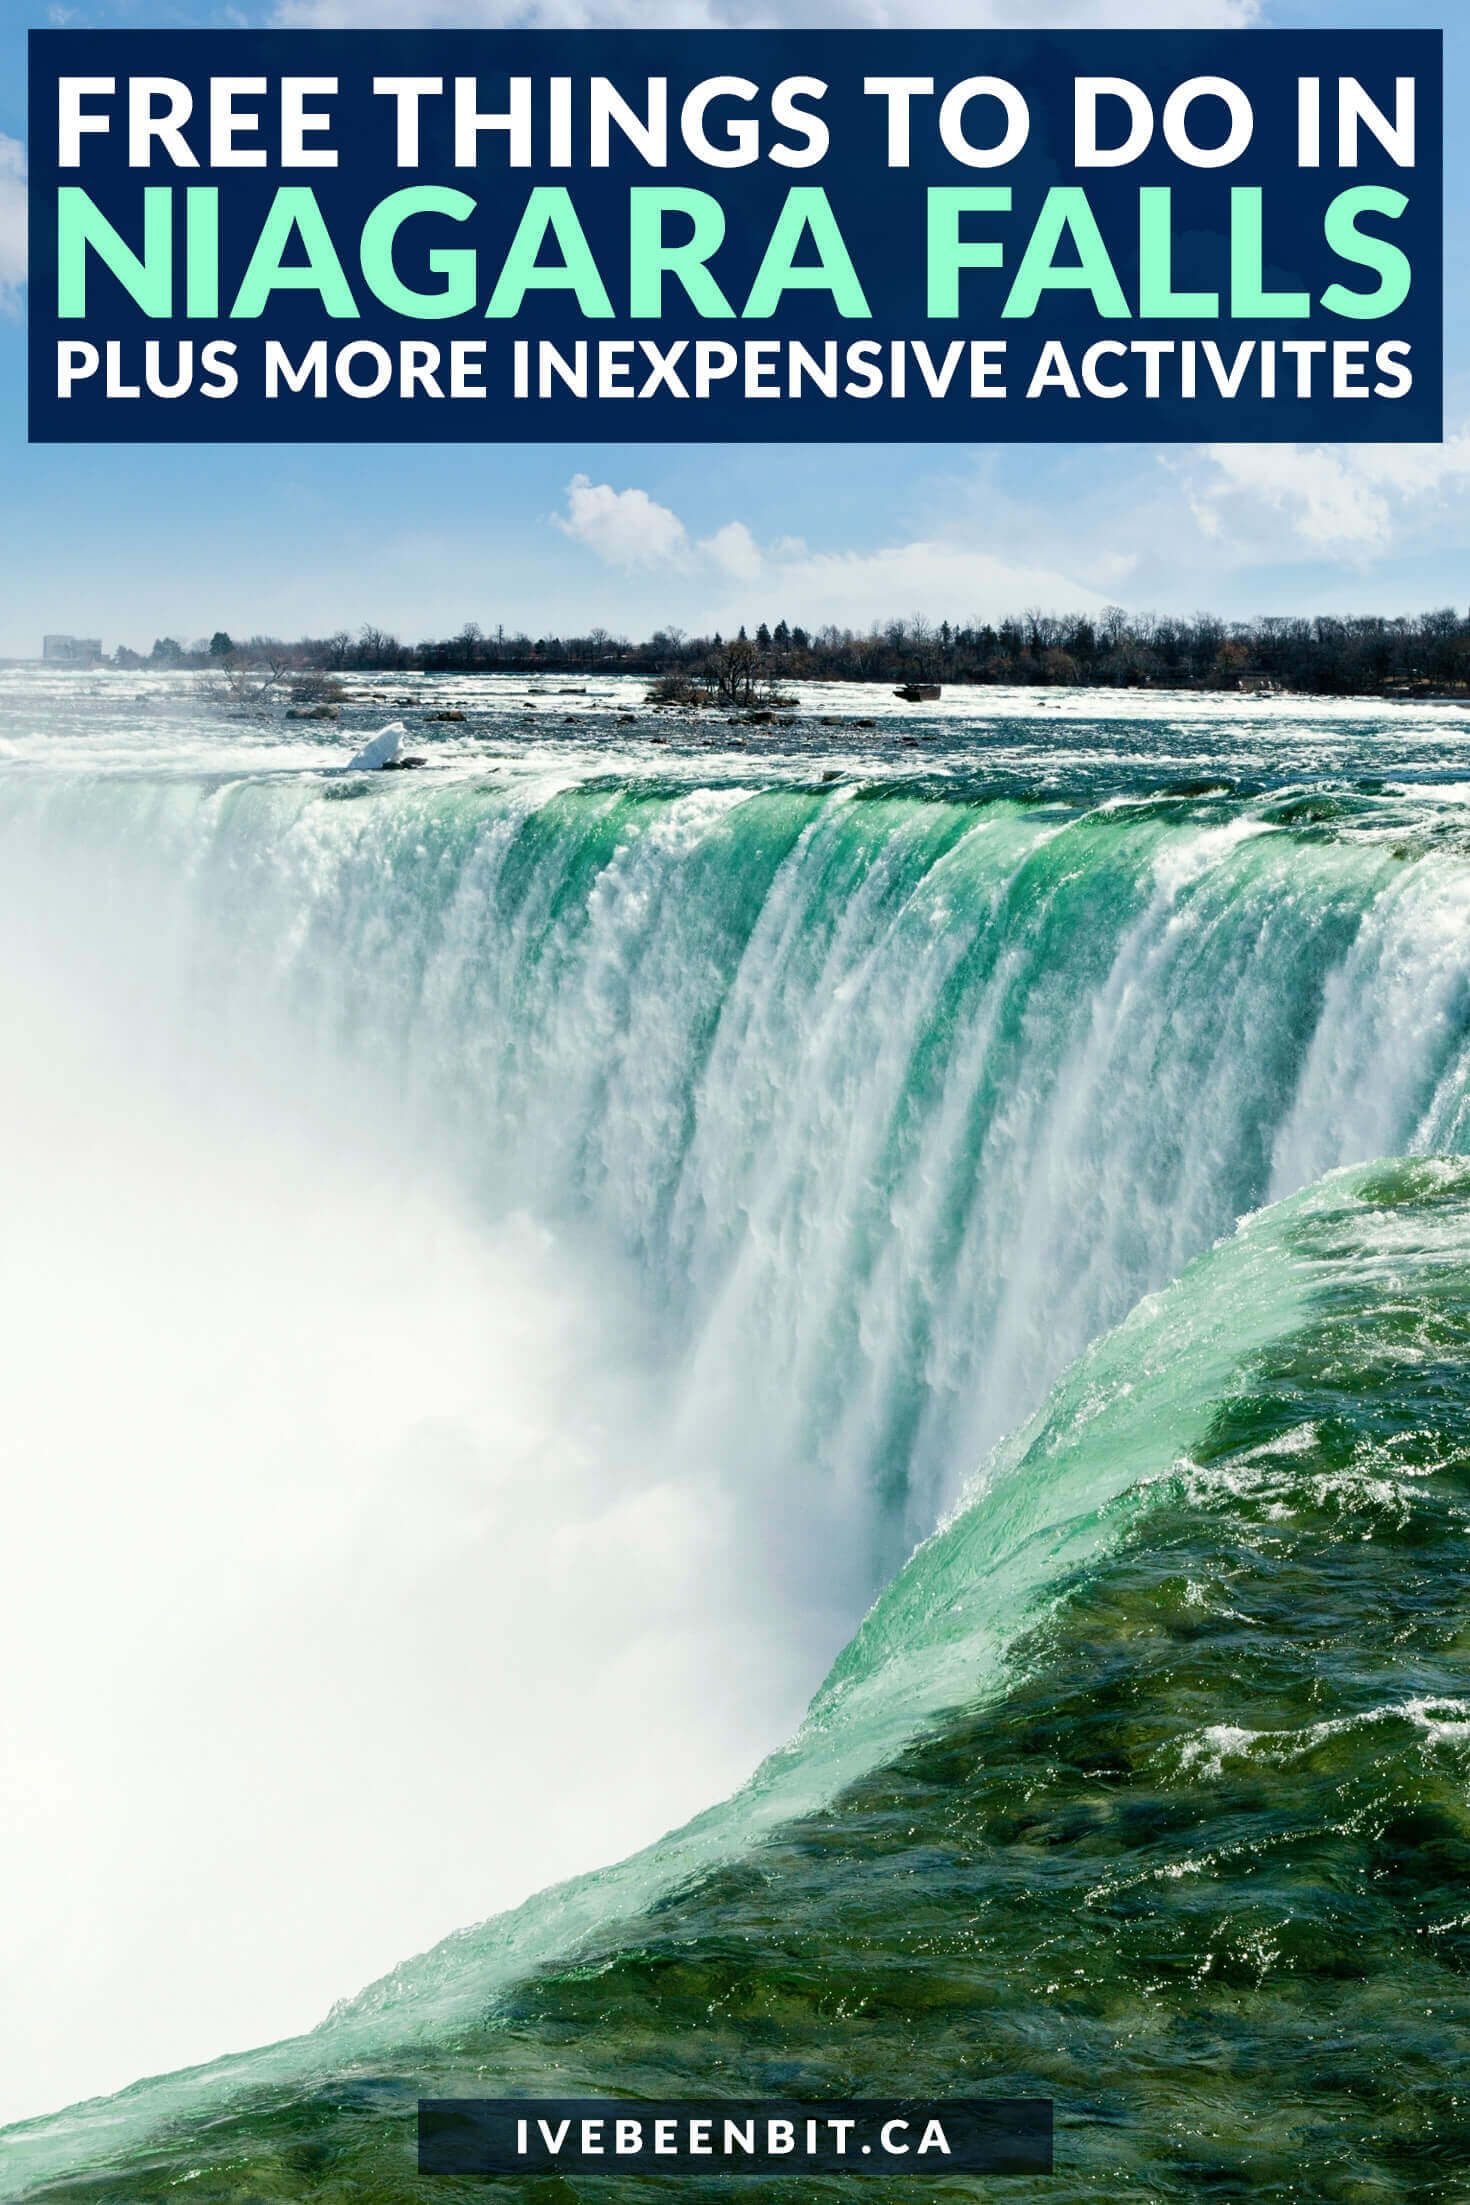 Planning to visit Niagara Falls & don't want to break the bank? Check out these top FREE things to do in Niagara Falls Canada! | Niagara Falls activities | What to Do in Niagara Falls Ontario | Things to do Near Niagara Falls | Things to Do in Niagara Falls with Kids | Niagara Falls Bucket List | Day Trips from Toronto | Ontario Road Trips | Niagara Falls Free | Things to See in Niagara Falls | Niagara Falls Tips | Niagara Region | #Summer #Ontario